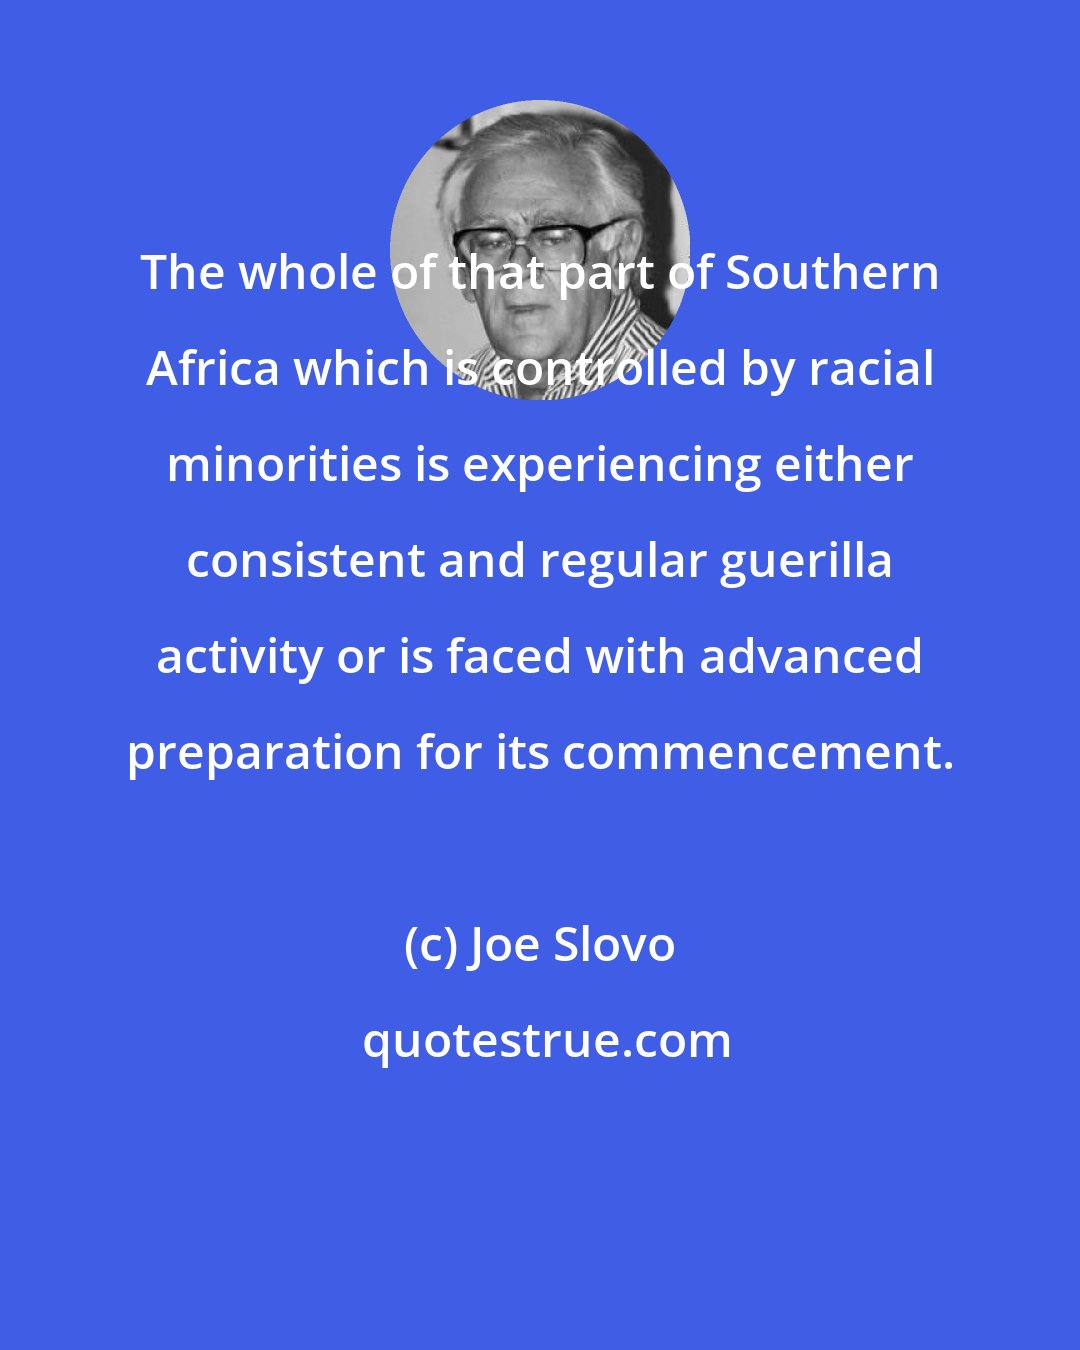 Joe Slovo: The whole of that part of Southern Africa which is controlled by racial minorities is experiencing either consistent and regular guerilla activity or is faced with advanced preparation for its commencement.